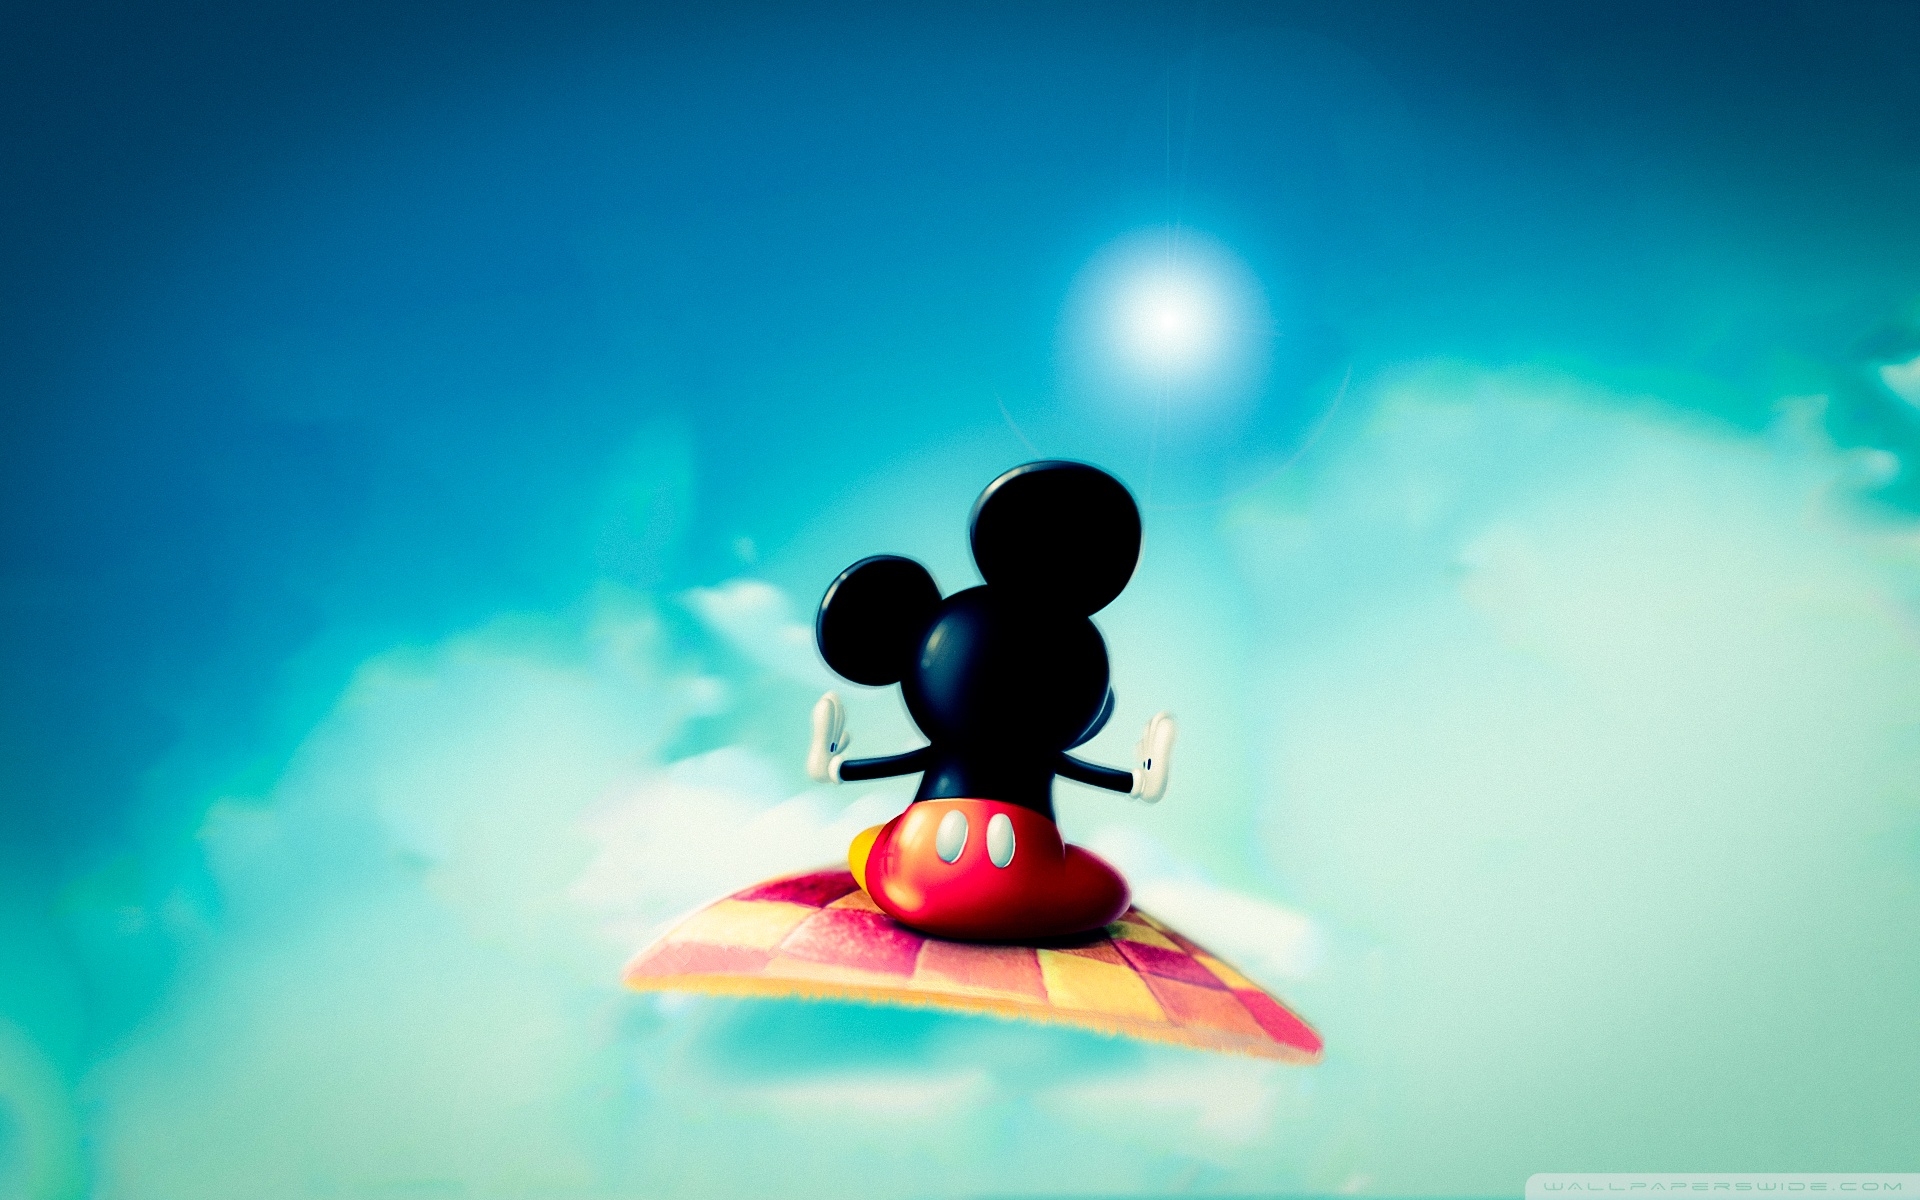 Wallpaperswide Com Old Disney Ultra Hd Wallpapers For Uhd Widescreen Ultrawide Multi Display Desktop Tablet Smartphone Page 1